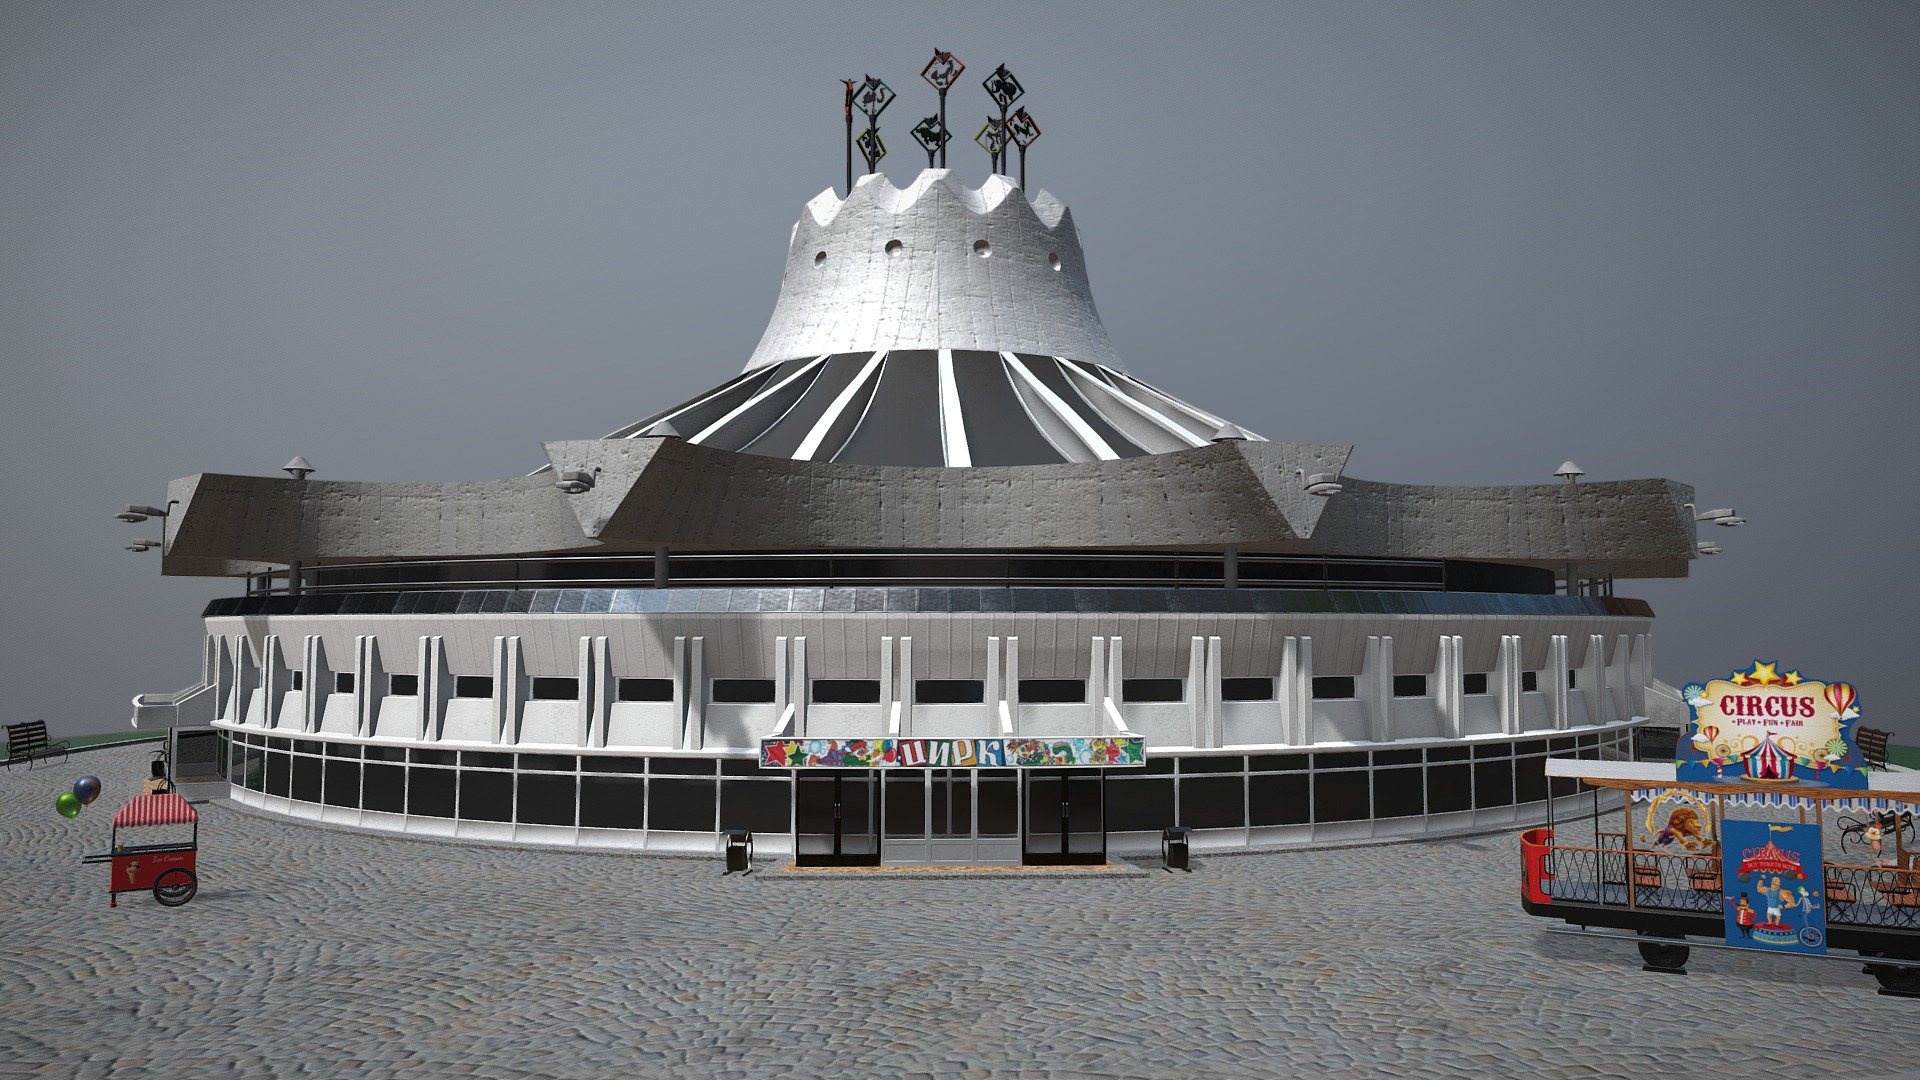 The model was made based on the real building of the circus located in the city of Dnipro, Ukraine 3d model